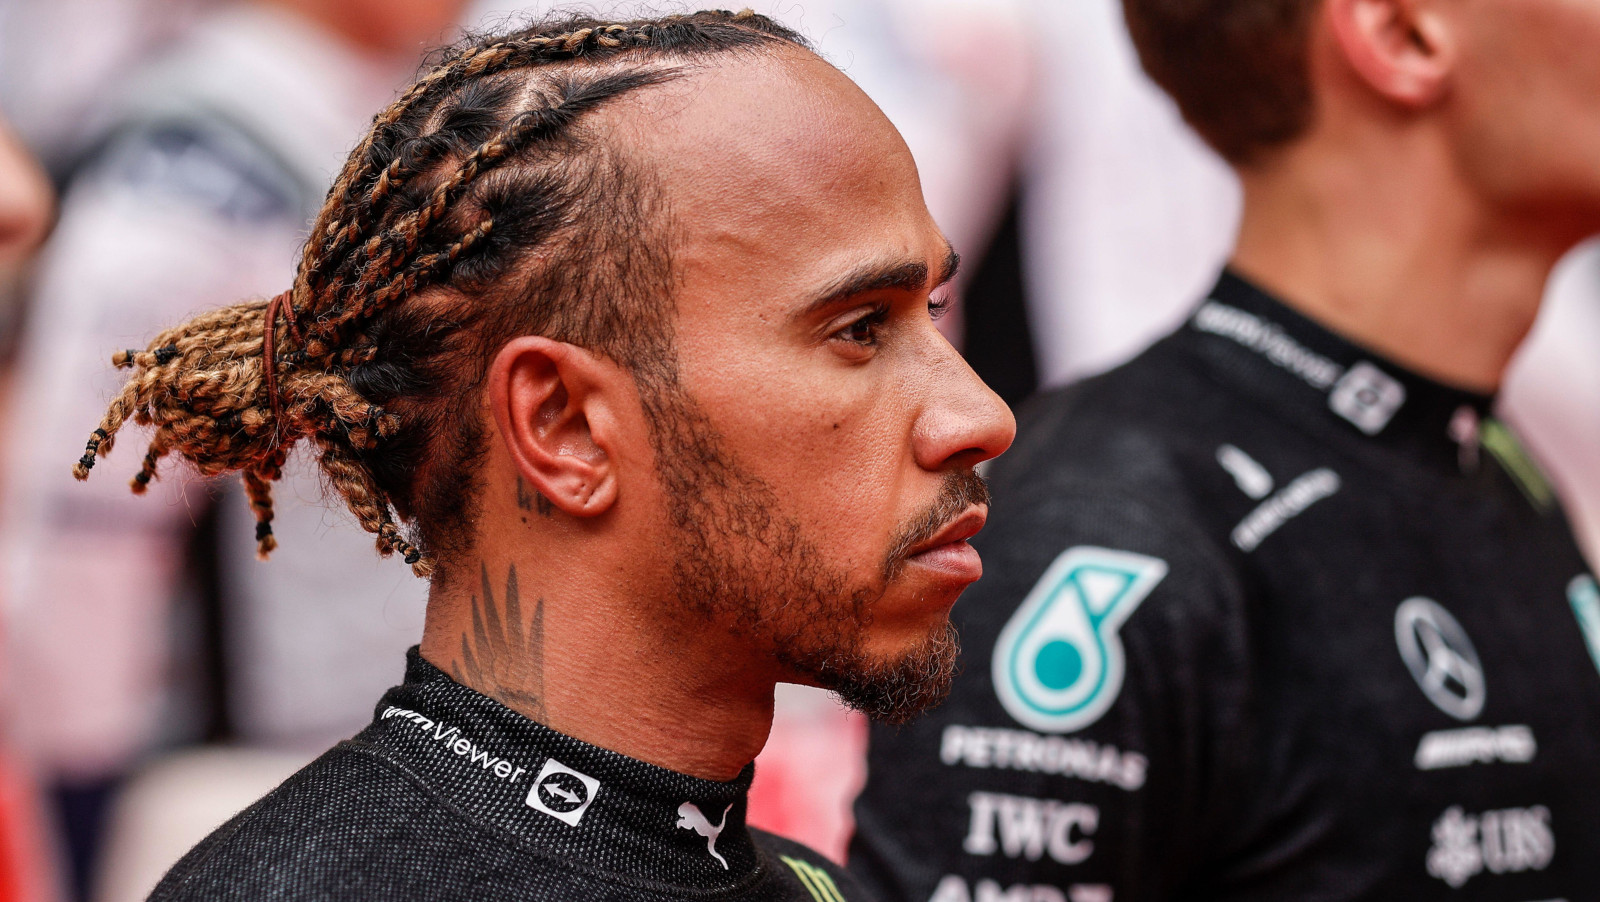 Lewis Hamilton on the grid for the national anthem, serious. Monaco May 2022